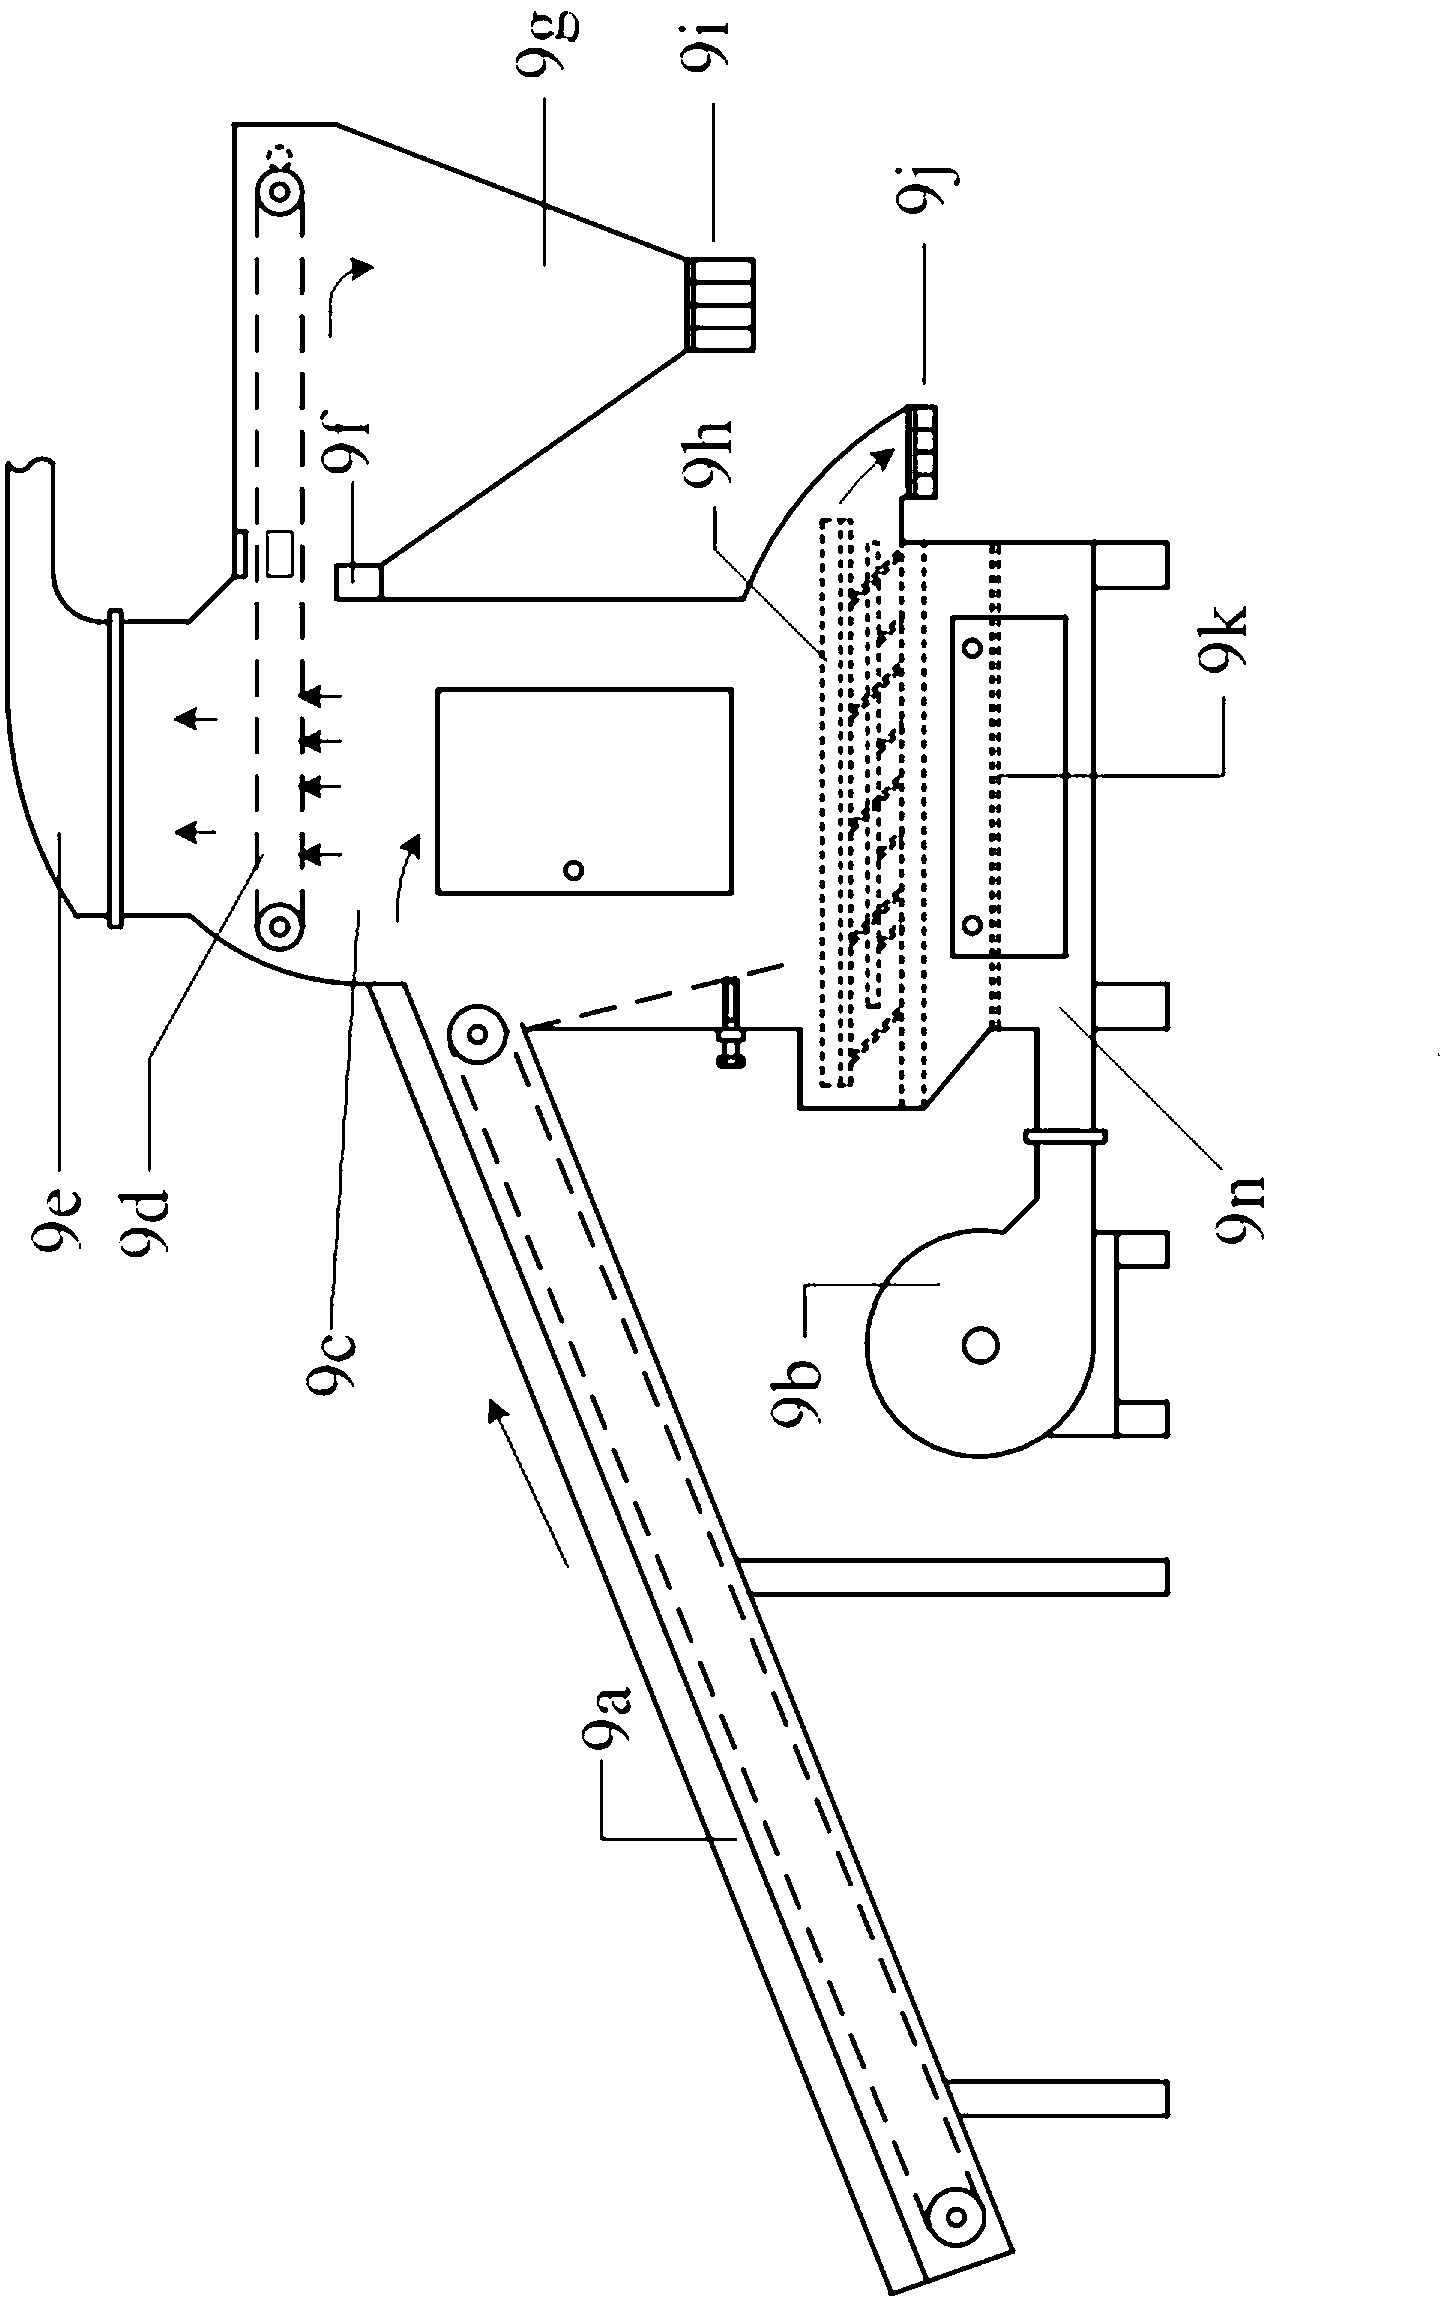 Energy-efficient threshing and pneumatic separating process and device